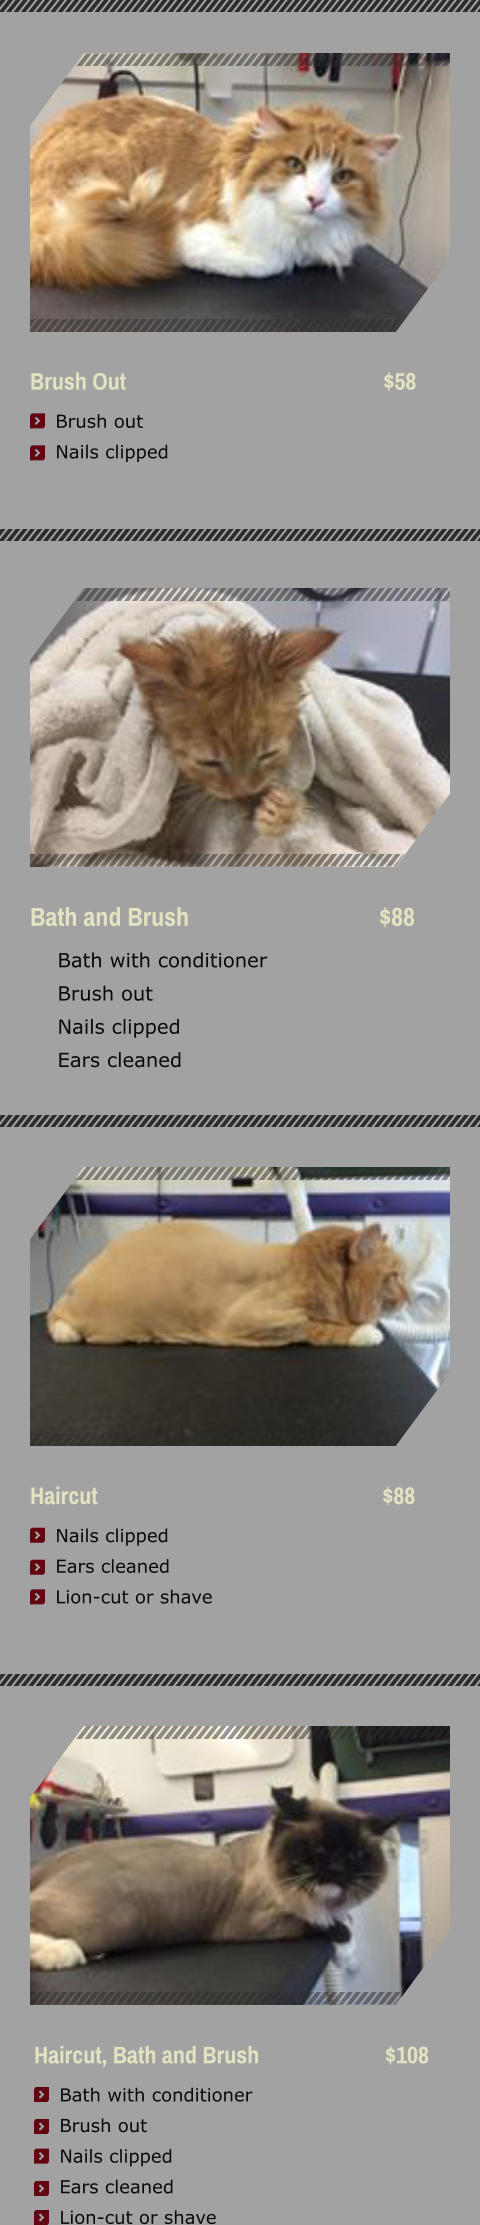 Bath and Brush                                $88     Bath with conditioner     Brush out     Nails clipped     Ears cleaned Brush Out                                               $58     Brush out     Nails clipped      Haircut                                                    $88     Nails clipped     Ears cleaned     Lion-cut or shave   Haircut, Bath and Brush                       $108      Bath with conditioner     Brush out     Nails clipped     Ears cleaned     Lion-cut or shave